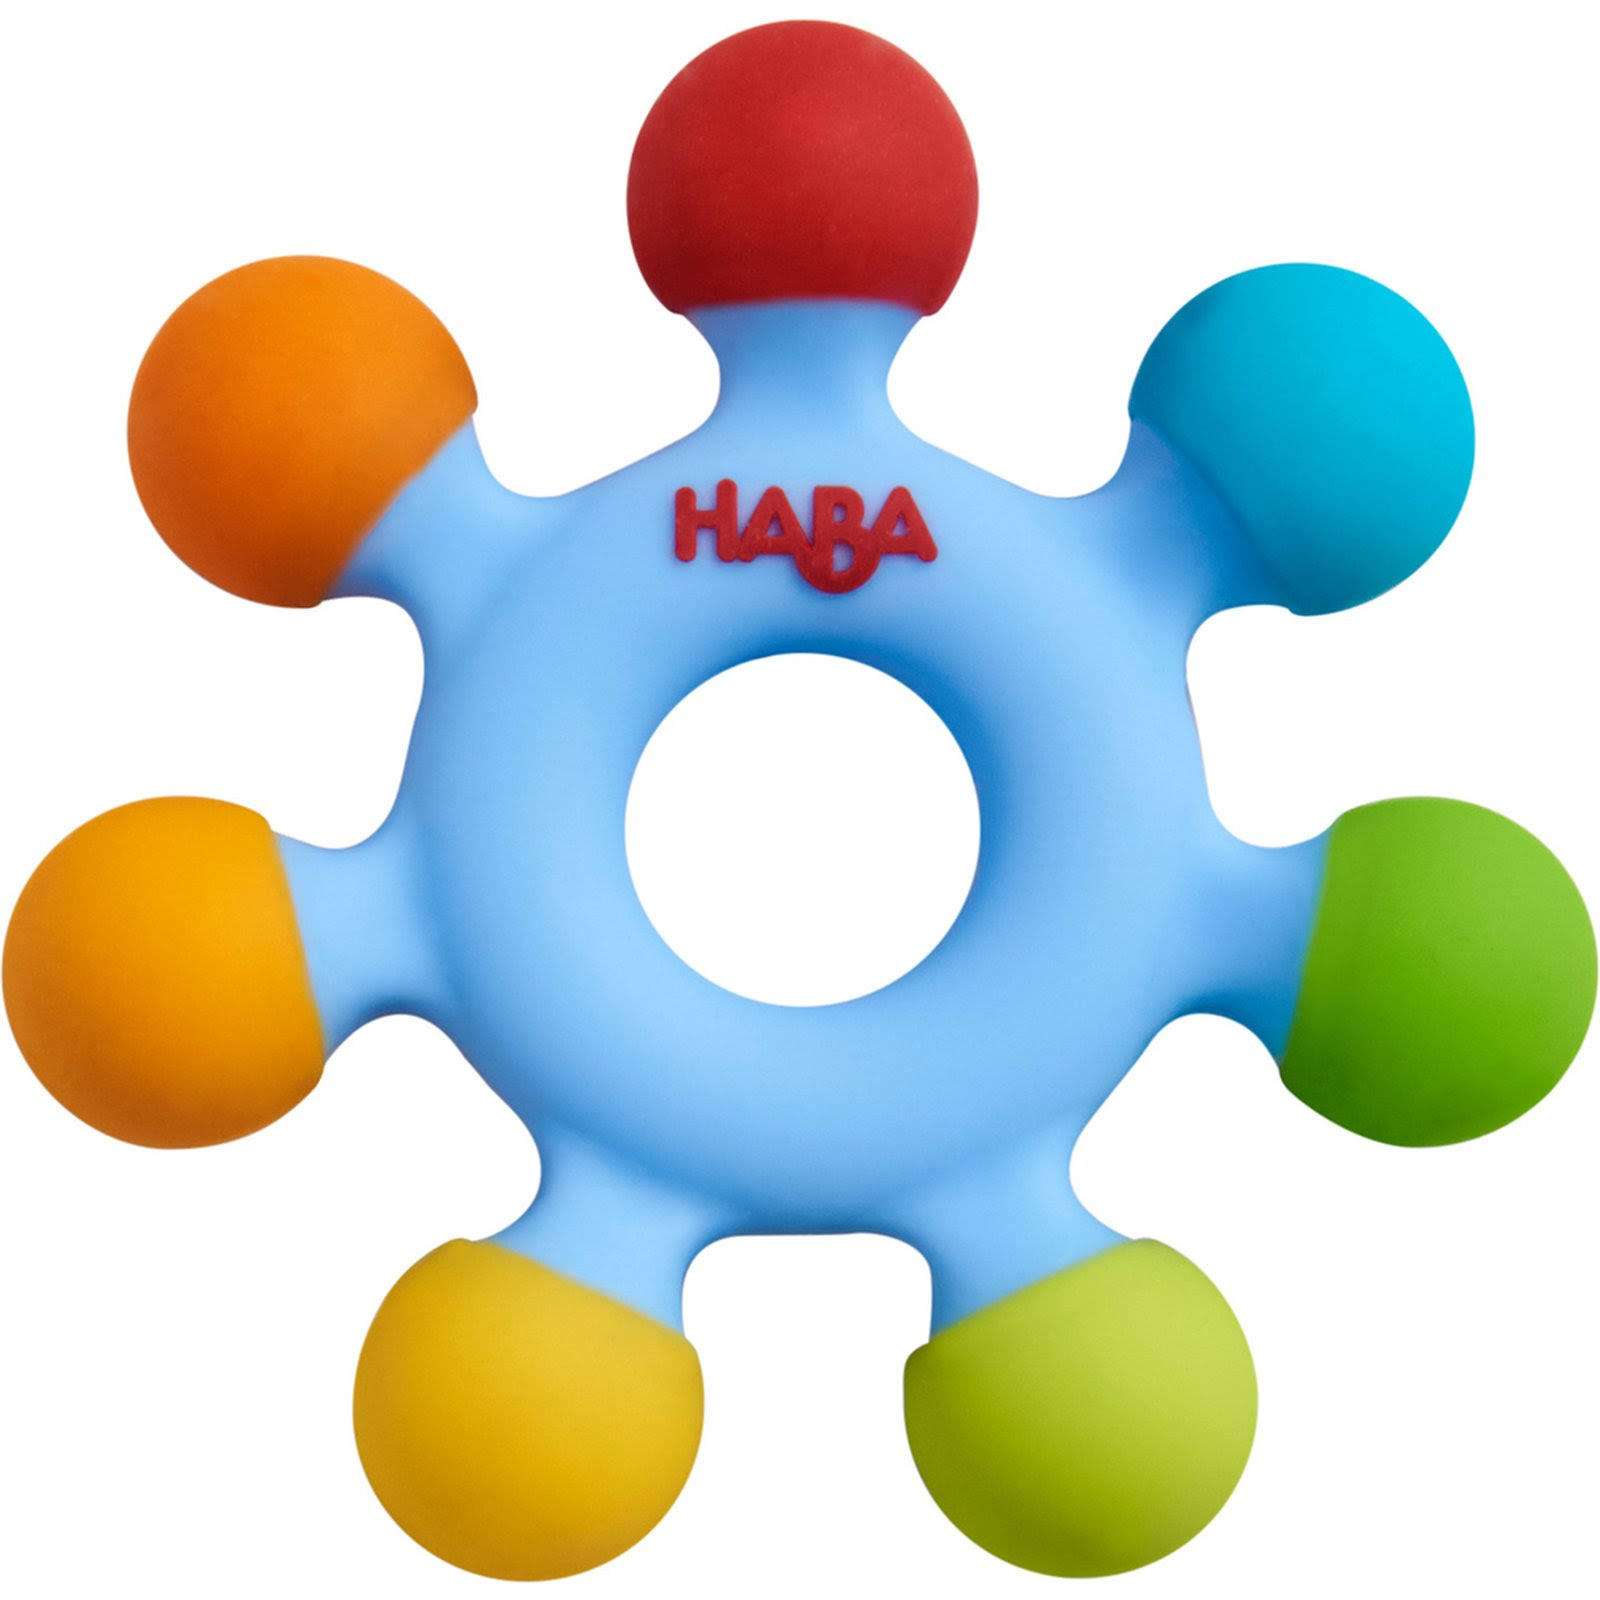 Haba Clutching Toy Color Wheel - Silicone Teether